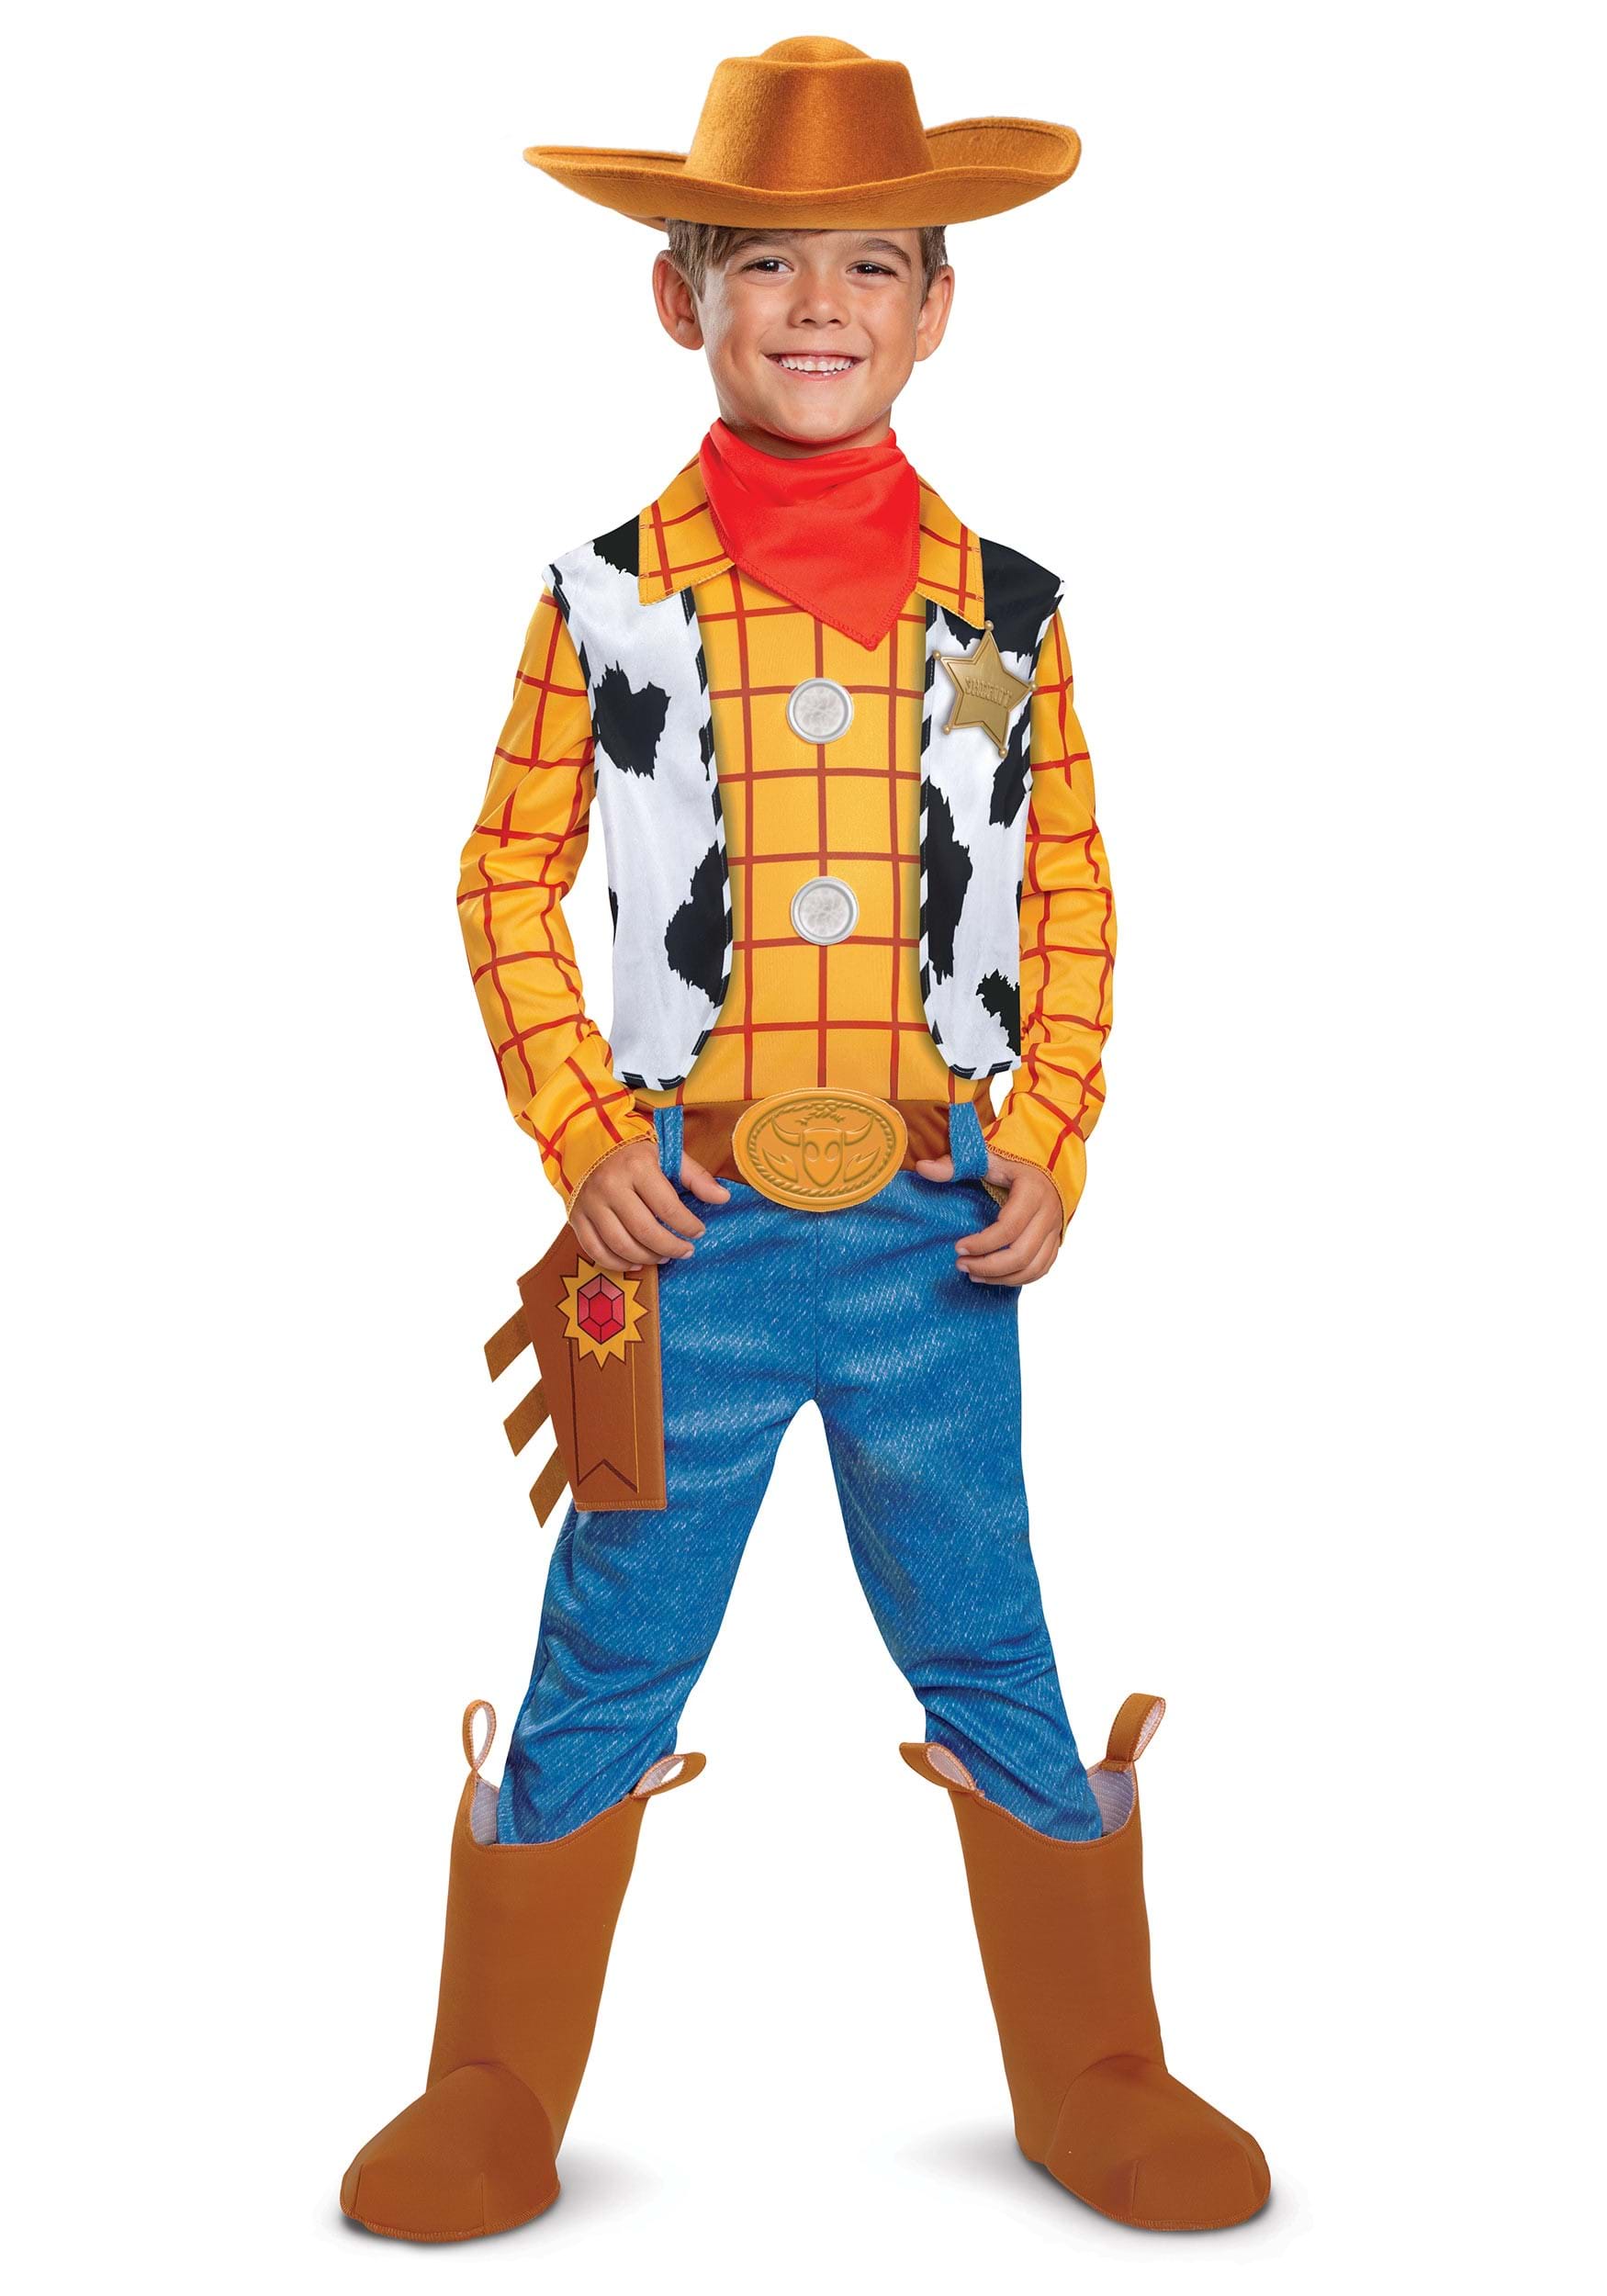 Photos - Fancy Dress Disney Disguise  Toy Story Classic Woody Costume for Boys |  Costumes 